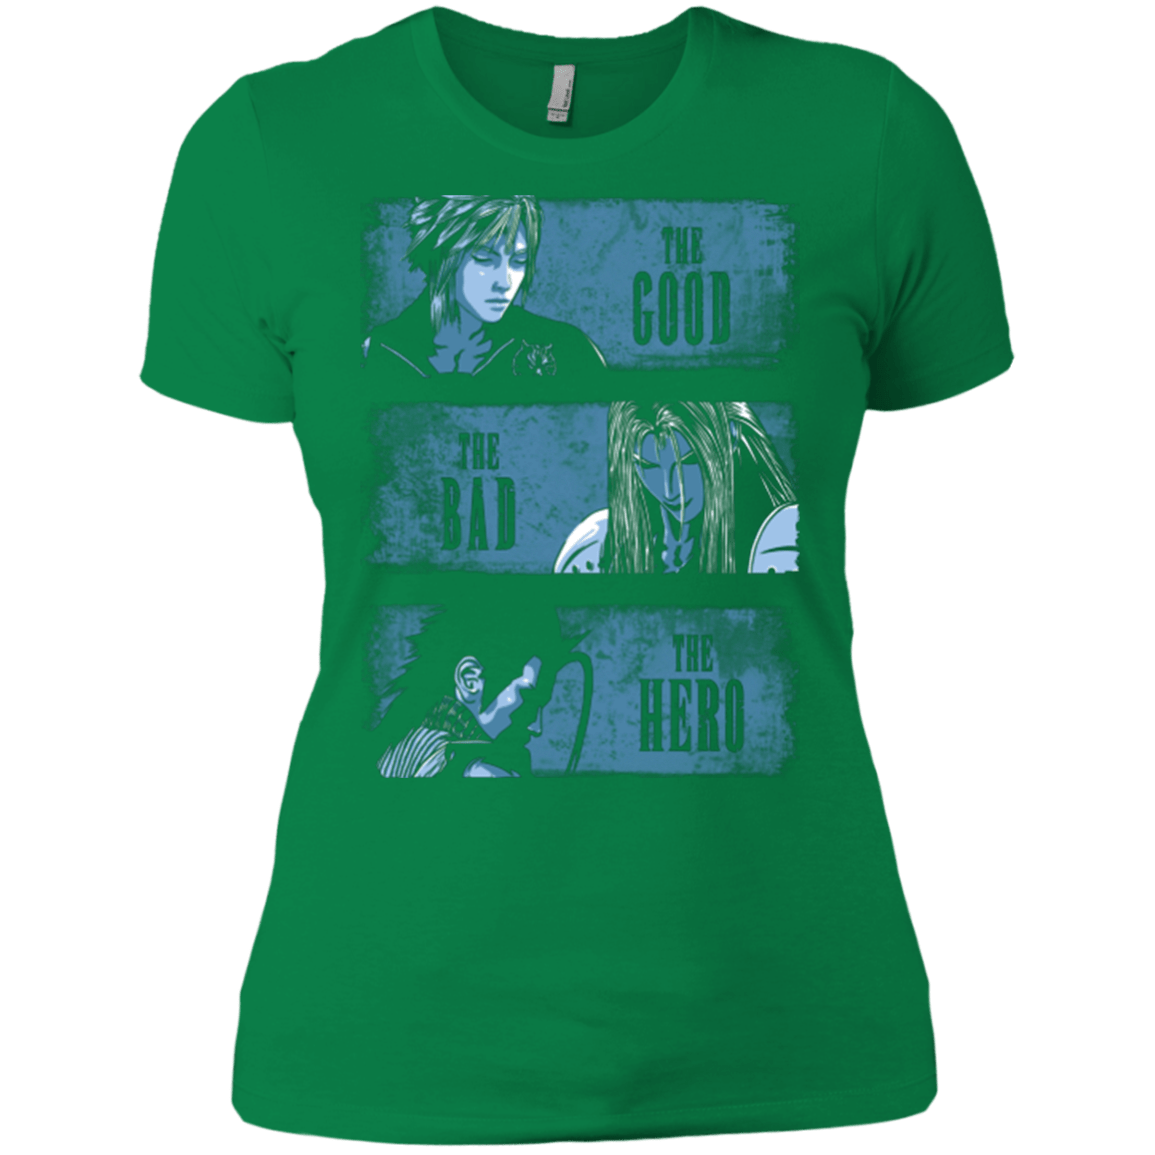 T-Shirts Kelly Green / X-Small The Good the Bad and the Hero Women's Premium T-Shirt